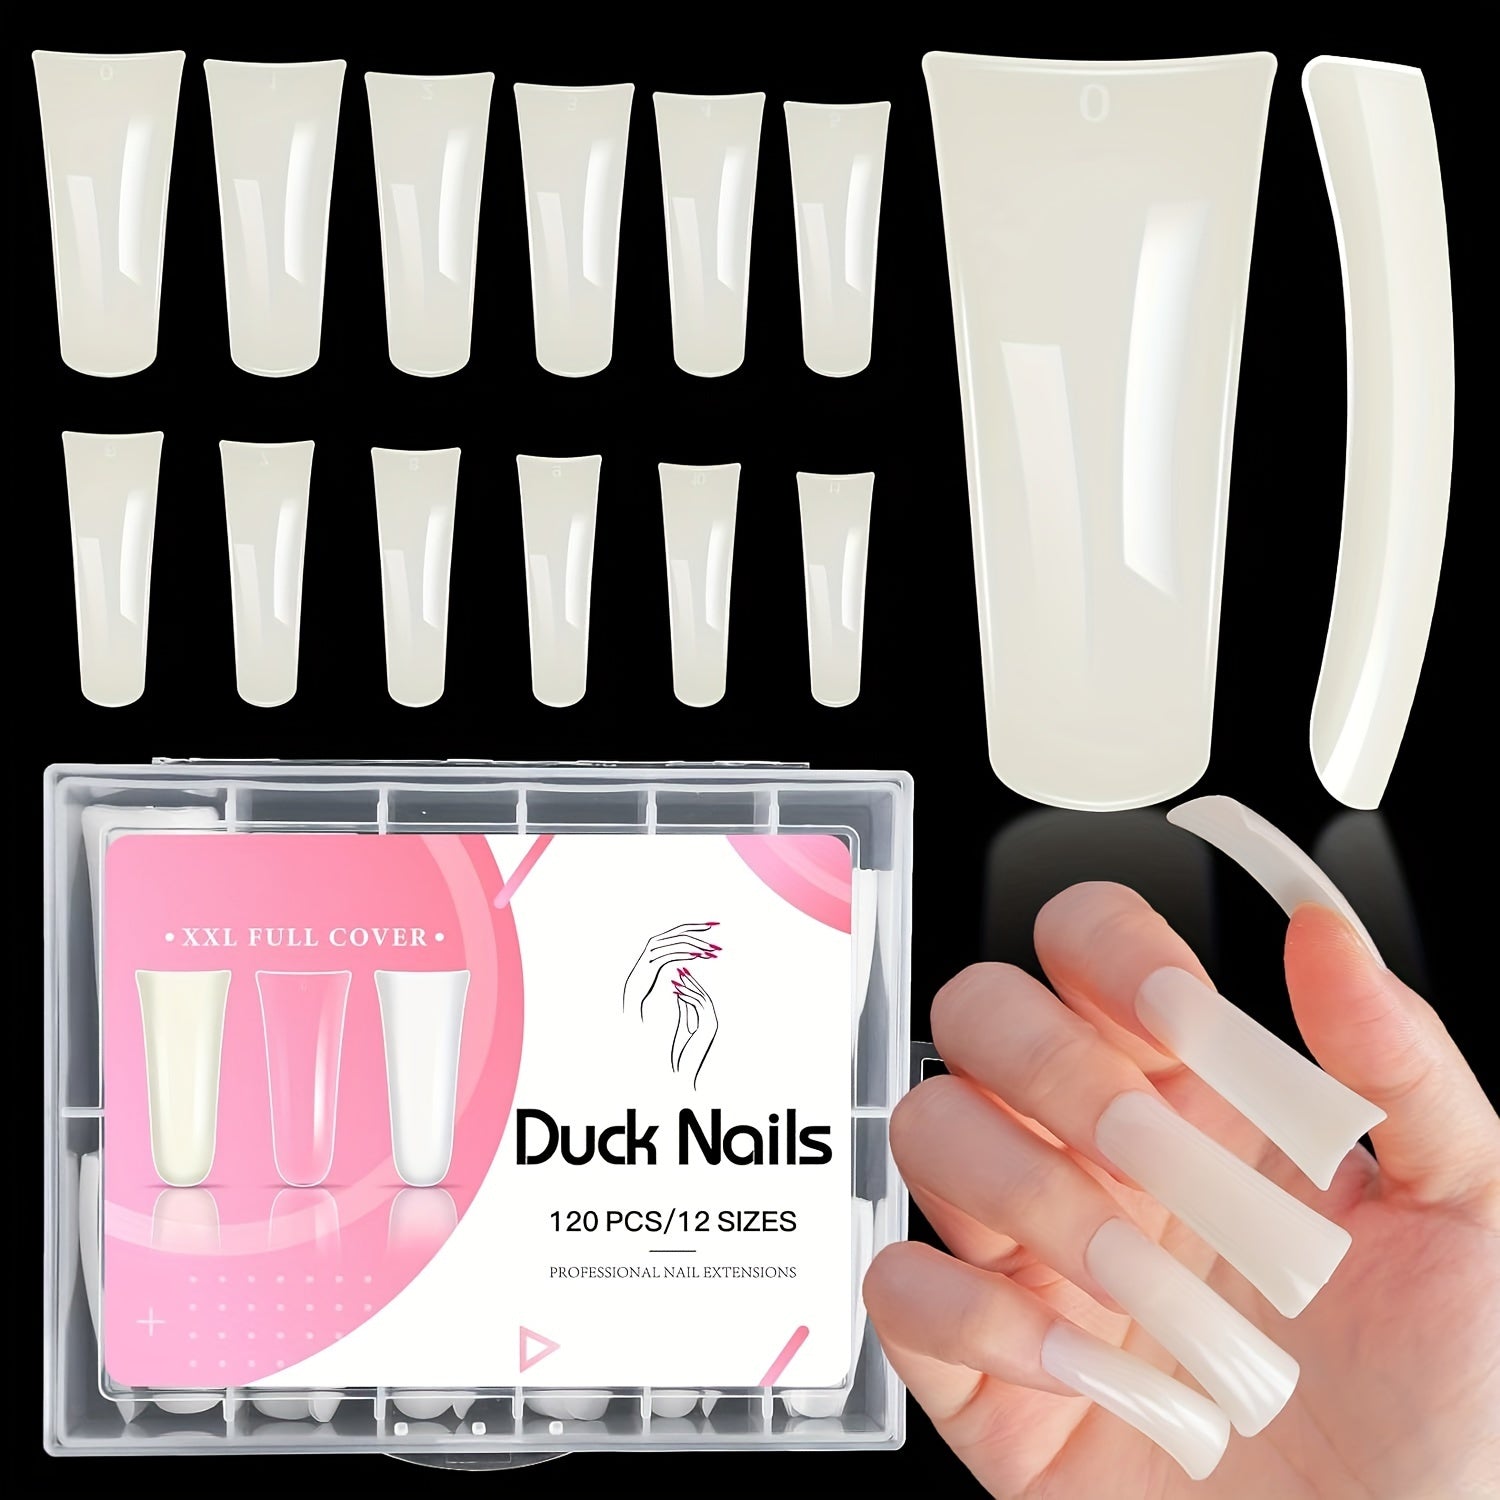 120pcs Shimmering Crystal Duck Nail Tips - 12 Sizes, Curved & Wide for Glamorous Acrylic Designs